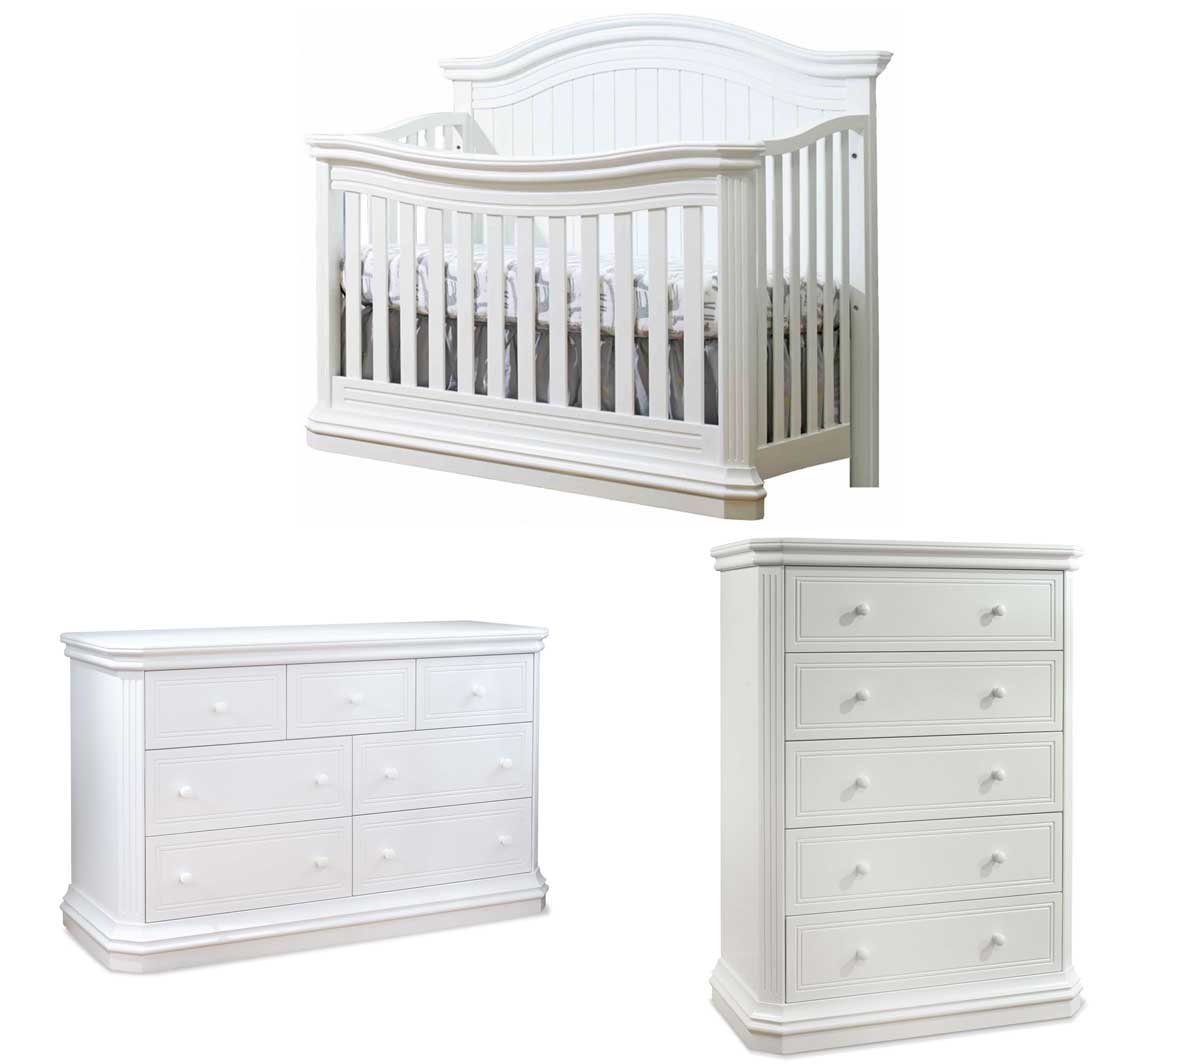 Crib Outlet Baby And Teen Furniture Product Details